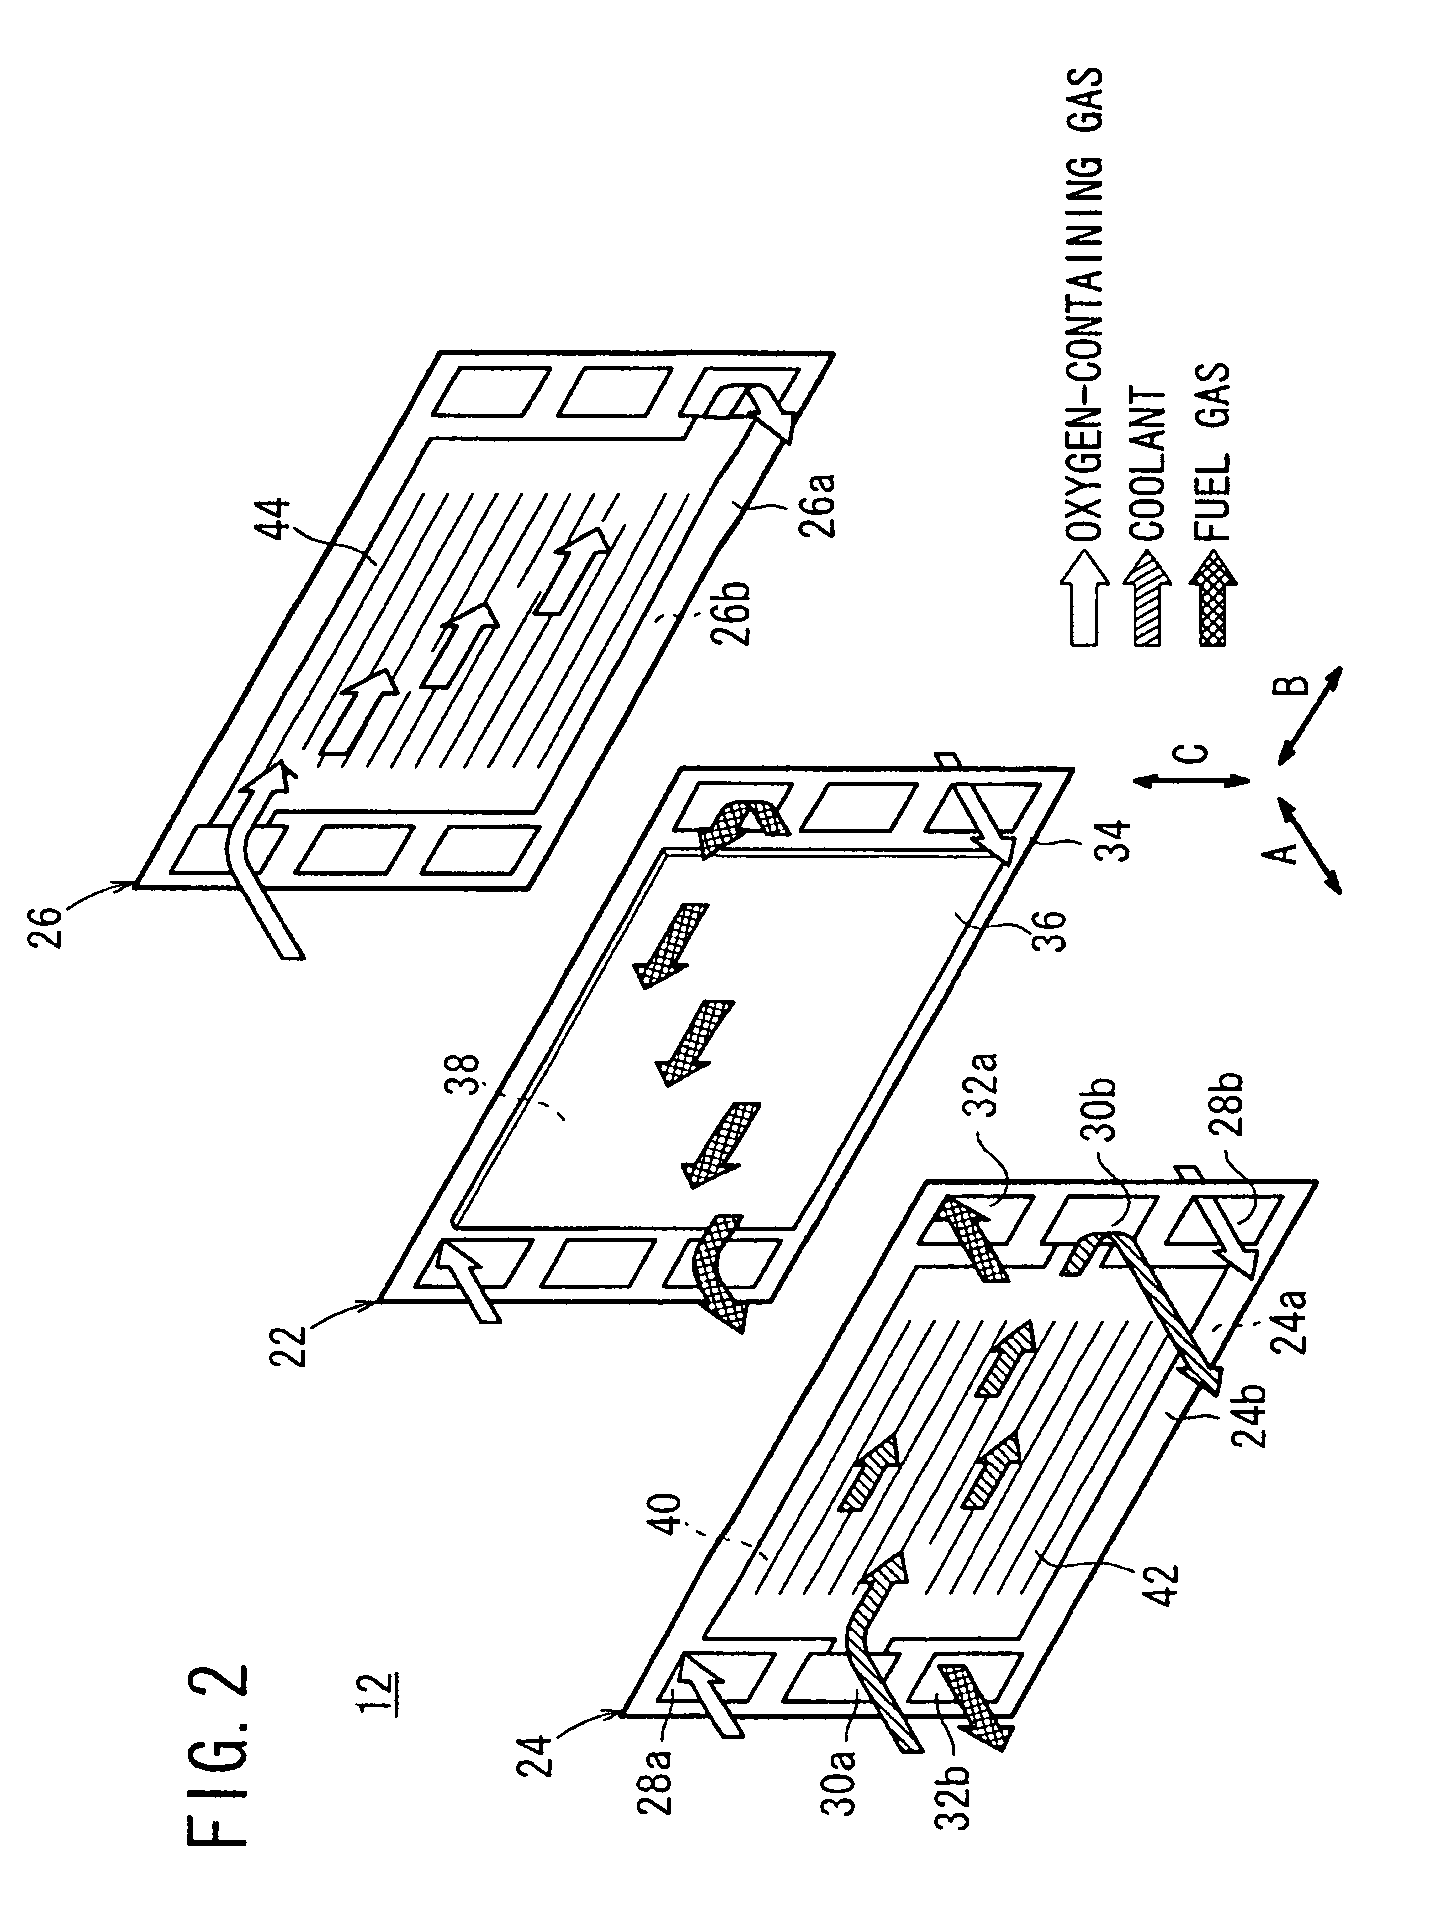 Fuel cell stack with power collecting terminals